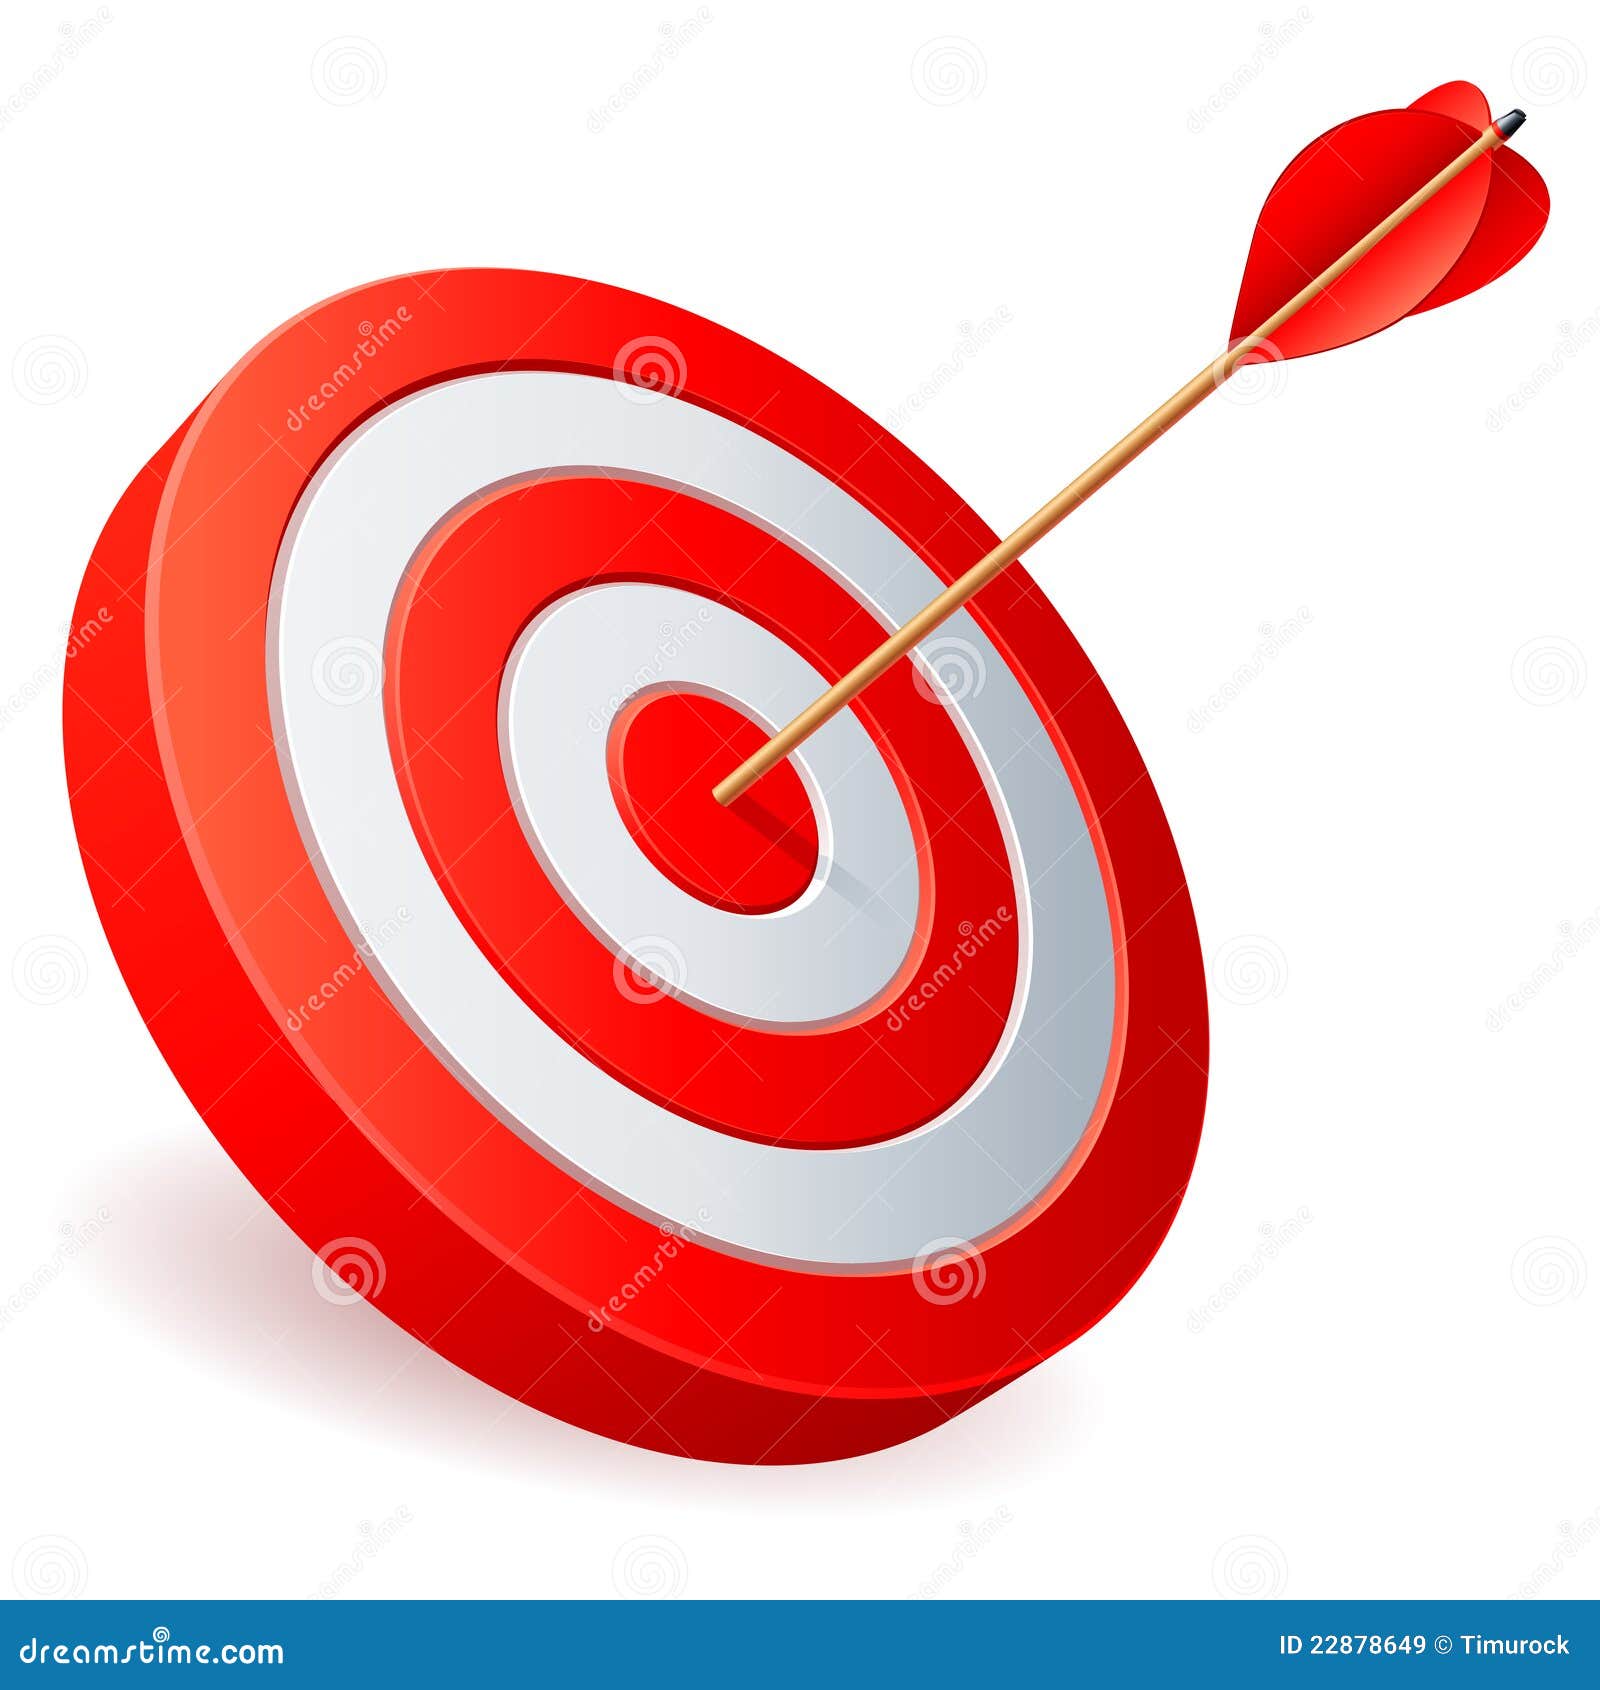 target with arrow.